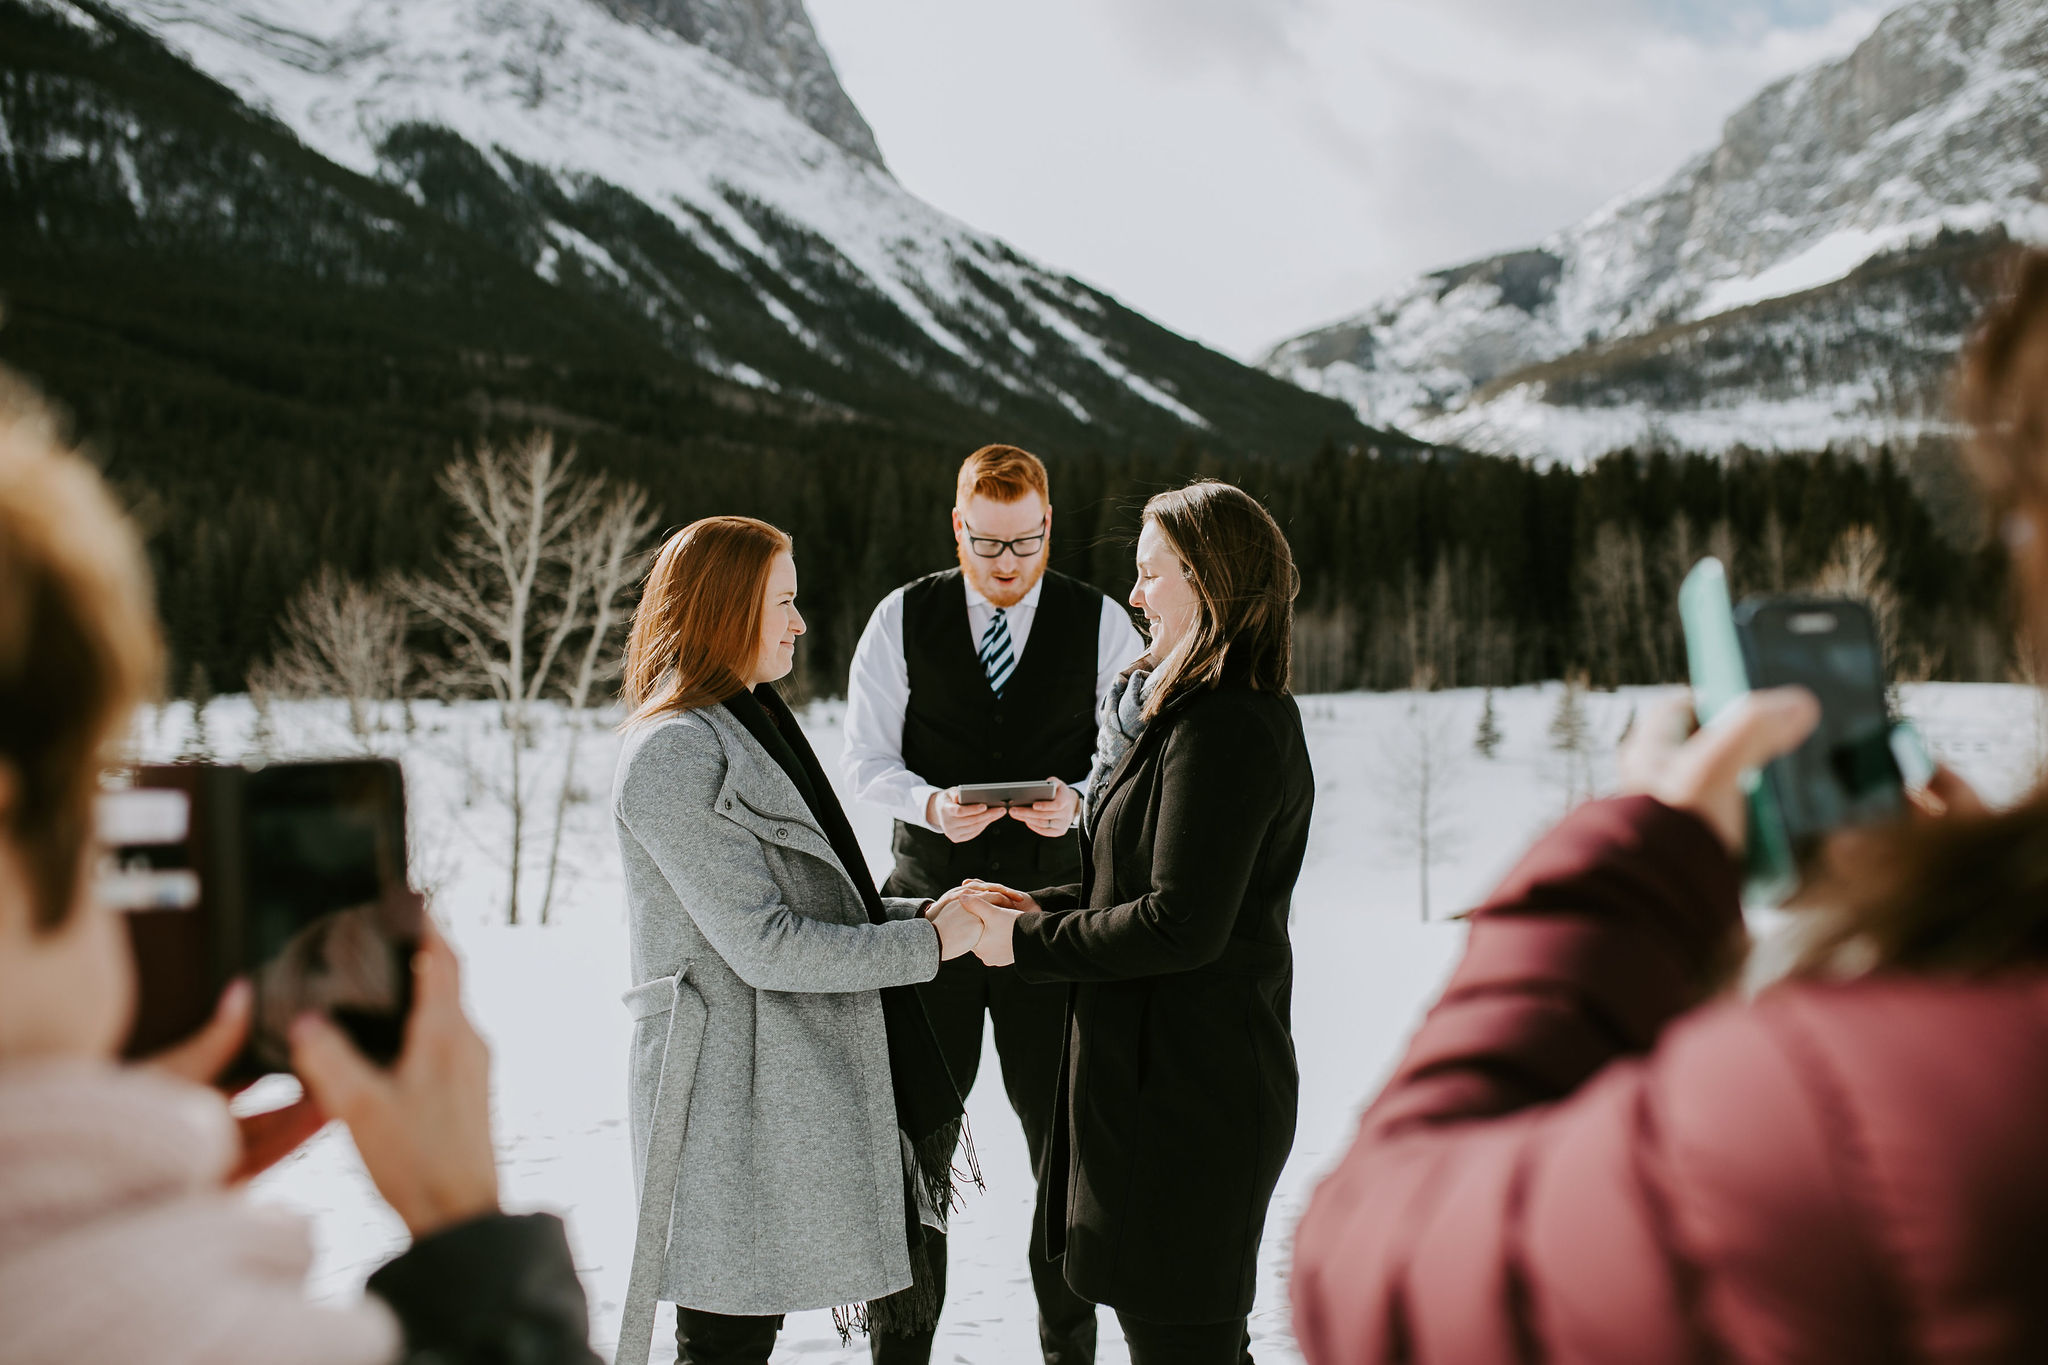 Elopement at Quarry Lake, Alberta with wedding officiant justice of the peace marriage commissioner wedding celebrant